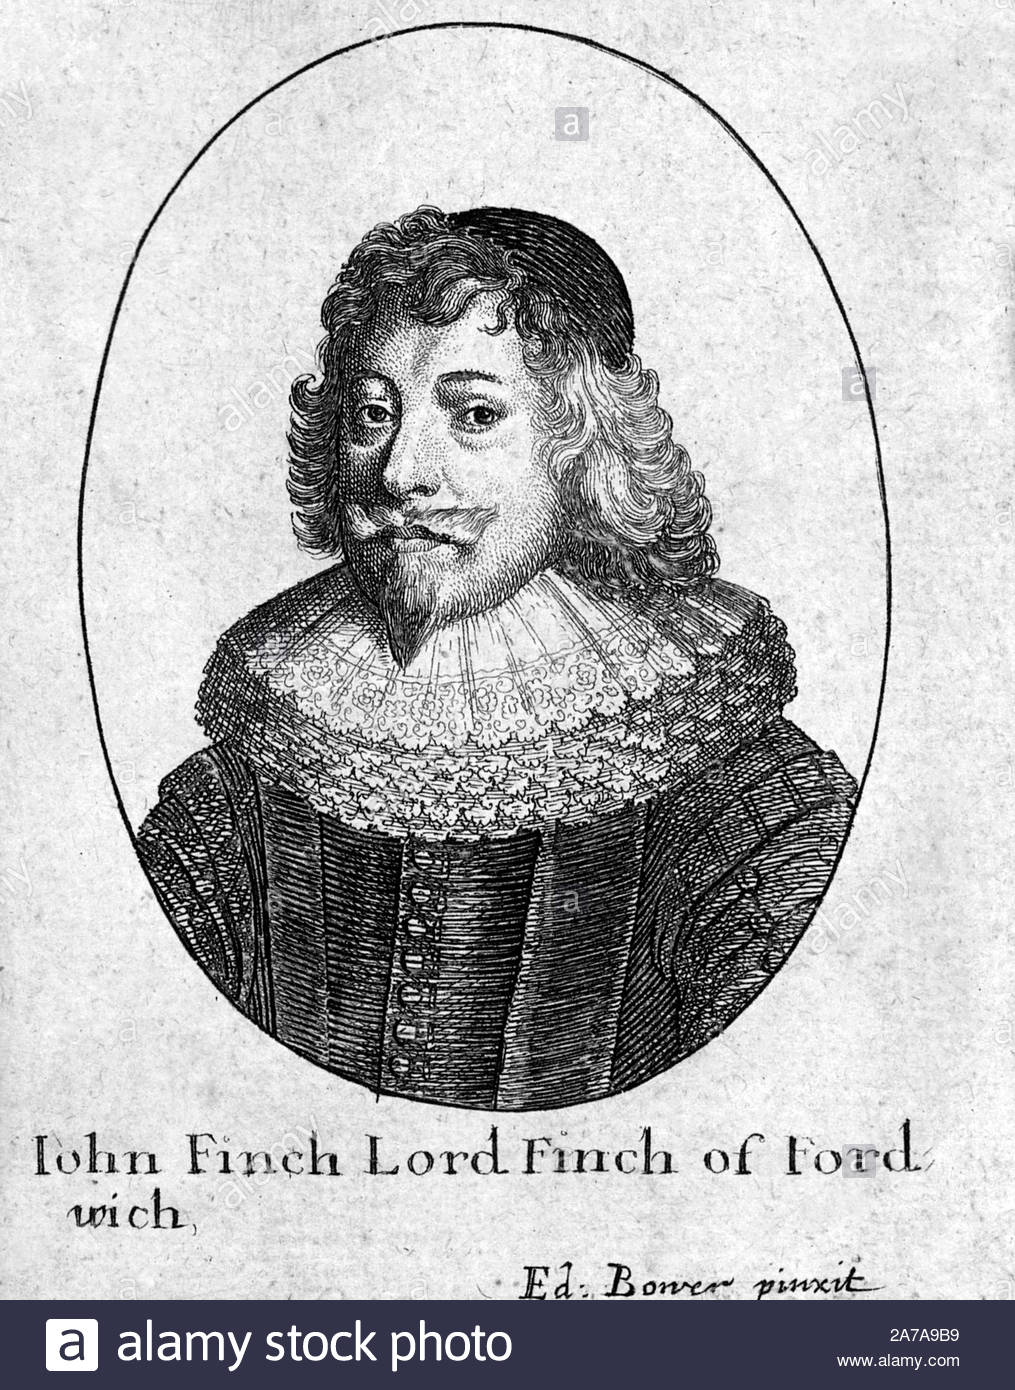 John Finch portrait, 1st Baron Finch, 1584 – 1660, was an English judge, and politician who sat in the House of Commons at various times between 1621 and 1629, he was also the Speaker of the House of Commons, etching by Bohemian etcher Wenceslaus Hollar from 1600s Stock Photo